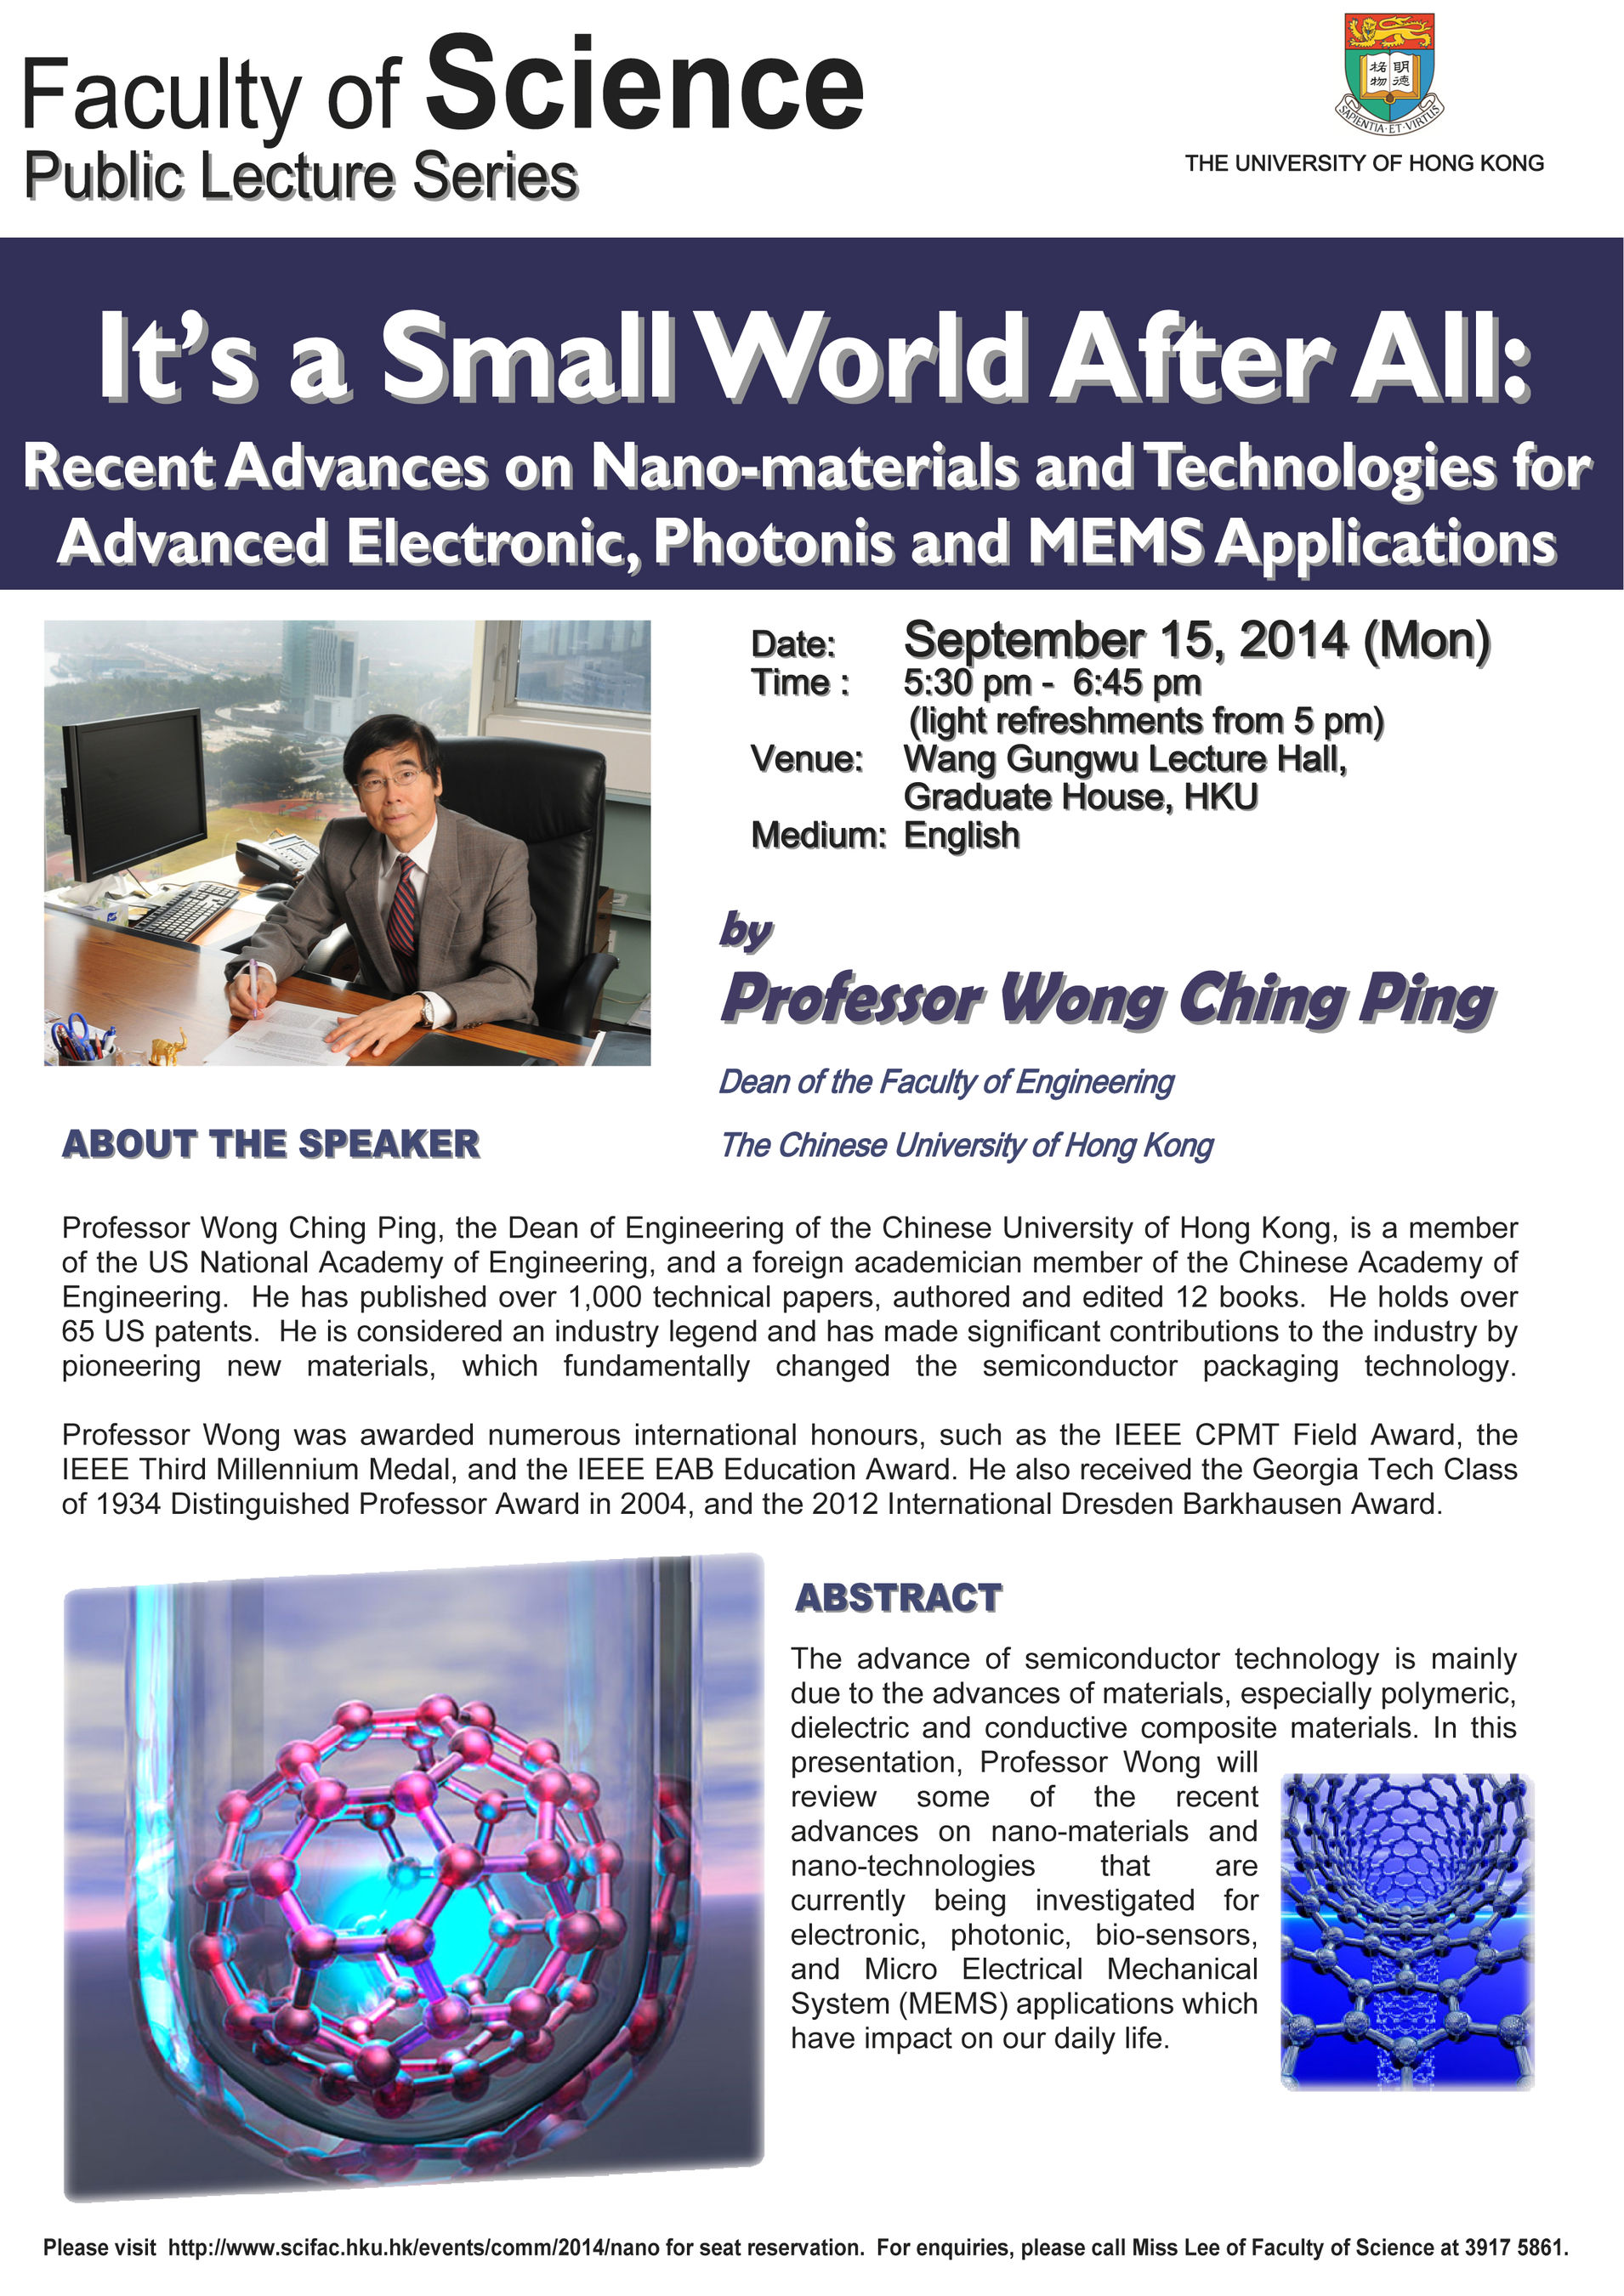 Public Lecture by Prof Wong Ching Ping, Dean of the Faculty of Engineering, The Chinese University of Hong Kong